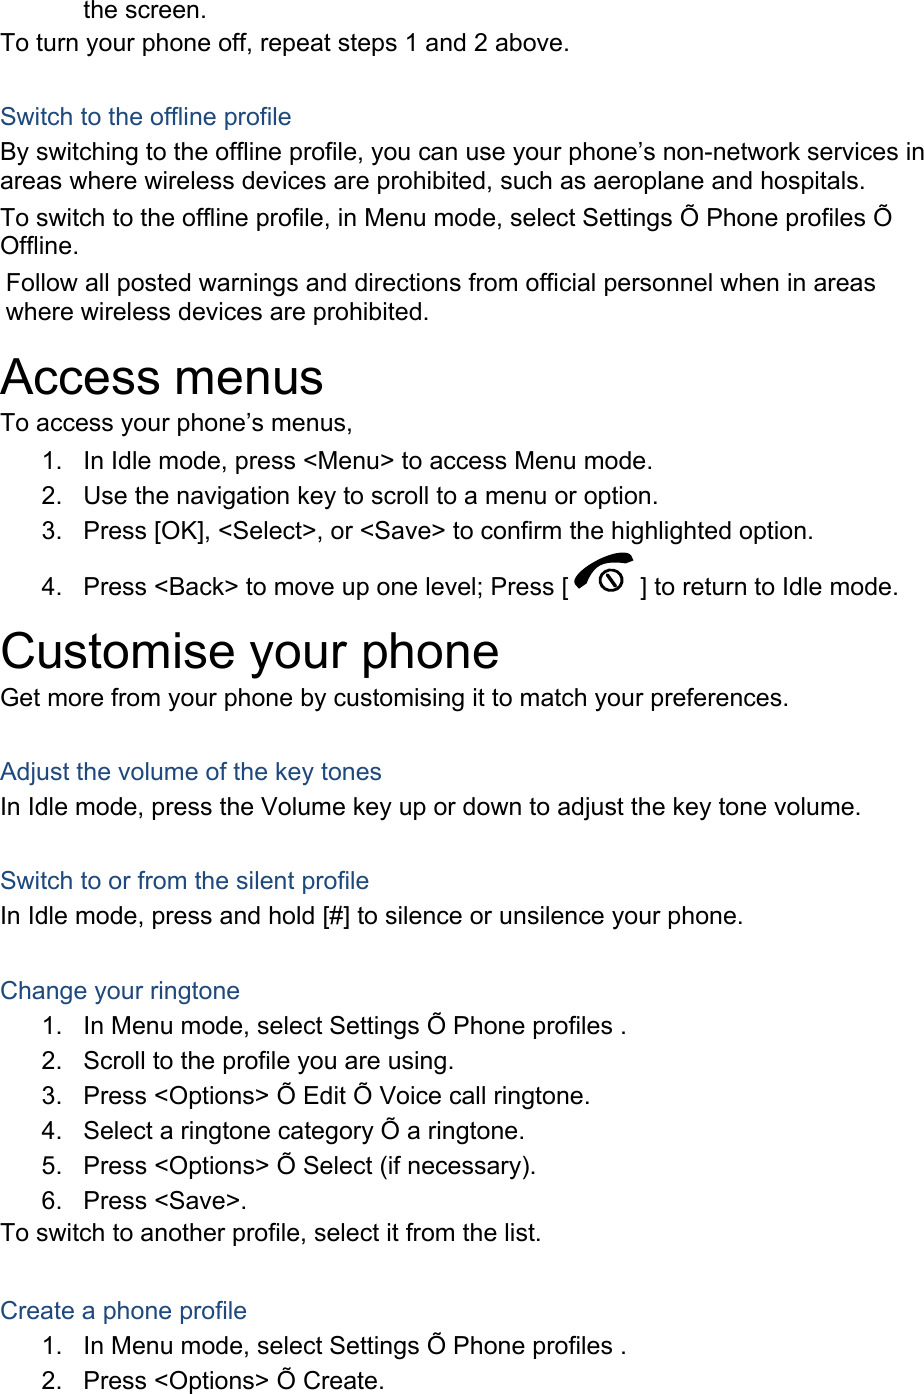 the screen. To turn your phone off, repeat steps 1 and 2 above.  Switch to the offline profile By switching to the offline profile, you can use your phone’s non-network services in areas where wireless devices are prohibited, such as aeroplane and hospitals. To switch to the offline profile, in Menu mode, select Settings Õ Phone profiles Õ Offline. Follow all posted warnings and directions from official personnel when in areas where wireless devices are prohibited. Access menus To access your phone’s menus, 1.  In Idle mode, press &lt;Menu&gt; to access Menu mode. 2.  Use the navigation key to scroll to a menu or option. 3.  Press [OK], &lt;Select&gt;, or &lt;Save&gt; to confirm the highlighted option. 4.  Press &lt;Back&gt; to move up one level; Press [ ] to return to Idle mode. Customise your phone Get more from your phone by customising it to match your preferences.  Adjust the volume of the key tones In Idle mode, press the Volume key up or down to adjust the key tone volume.  Switch to or from the silent profile In Idle mode, press and hold [#] to silence or unsilence your phone.  Change your ringtone 1.  In Menu mode, select Settings Õ Phone profiles . 2.  Scroll to the profile you are using. 3.  Press &lt;Options&gt; Õ Edit Õ Voice call ringtone. 4.  Select a ringtone category Õ a ringtone. 5.  Press &lt;Options&gt; Õ Select (if necessary). 6. Press &lt;Save&gt;. To switch to another profile, select it from the list.  Create a phone profile 1.  In Menu mode, select Settings Õ Phone profiles . 2.  Press &lt;Options&gt; Õ Create. 